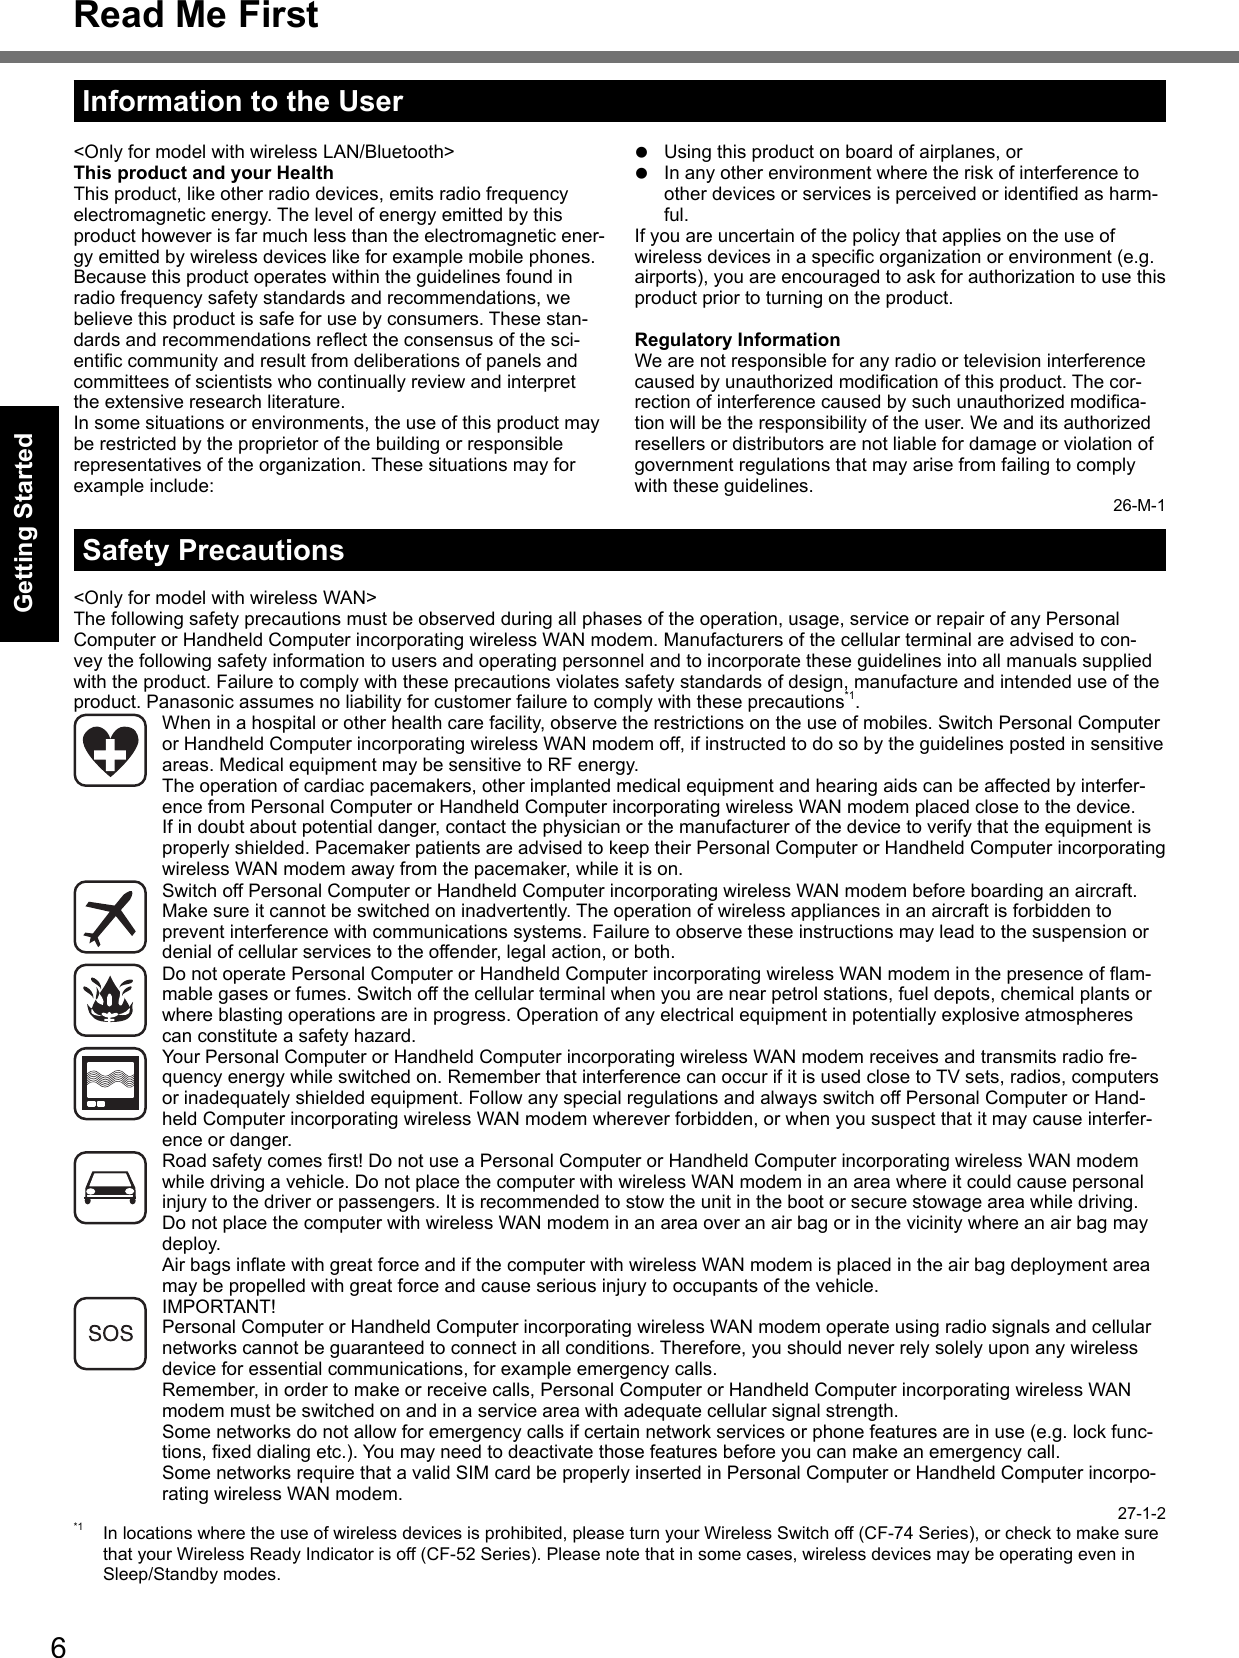 6Getting StartedRead Me FirstSafety Precautions&lt;Only for model with wireless WAN&gt;The following safety precautions must be observed during all phases of the operation, usage, service or repair of any Personal Computer or Handheld Computer incorporating wireless WAN modem. Manufacturers of the cellular terminal are advised to con-vey the following safety information to users and operating personnel and to incorporate these guidelines into all manuals supplied with the product. Failure to comply with these precautions violates safety standards of design, manufacture and intended use of the product. Panasonic assumes no liability for customer failure to comply with these precautions*1.  When in a hospital or other health care facility, observe the restrictions on the use of mobiles. Switch Personal Computer or Handheld Computer incorporating wireless WAN modem off, if instructed to do so by the guidelines posted in sensitive areas. Medical equipment may be sensitive to RF energy.   The operation of cardiac pacemakers, other implanted medical equipment and hearing aids can be affected by interfer-ence from Personal Computer or Handheld Computer incorporating wireless WAN modem placed close to the device. If in doubt about potential danger, contact the physician or the manufacturer of the device to verify that the equipment is properly shielded. Pacemaker patients are advised to keep their Personal Computer or Handheld Computer incorporating wireless WAN modem away from the pacemaker, while it is on.  Switch off Personal Computer or Handheld Computer incorporating wireless WAN modem before boarding an aircraft. Make sure it cannot be switched on inadvertently. The operation of wireless appliances in an aircraft is forbidden to prevent interference with communications systems. Failure to observe these instructions may lead to the suspension or denial of cellular services to the offender, legal action, or both.  Do not operate Personal Computer or Handheld Computer incorporating wireless WAN modem in the presence of ﬂ am-mable gases or fumes. Switch off the cellular terminal when you are near petrol stations, fuel depots, chemical plants or where blasting operations are in progress. Operation of any electrical equipment in potentially explosive atmospheres can constitute a safety hazard.  Your Personal Computer or Handheld Computer incorporating wireless WAN modem receives and transmits radio fre-quency energy while switched on. Remember that interference can occur if it is used close to TV sets, radios, computers or inadequately shielded equipment. Follow any special regulations and always switch off Personal Computer or Hand-held Computer incorporating wireless WAN modem wherever forbidden, or when you suspect that it may cause interfer-ence or danger.  Road safety comes ﬁ rst! Do not use a Personal Computer or Handheld Computer incorporating wireless WAN modem while driving a vehicle. Do not place the computer with wireless WAN modem in an area where it could cause personal injury to the driver or passengers. It is recommended to stow the unit in the boot or secure stowage area while driving.   Do not place the computer with wireless WAN modem in an area over an air bag or in the vicinity where an air bag may deploy.   Air bags inﬂ ate with great force and if the computer with wireless WAN modem is placed in the air bag deployment area may be propelled with great force and cause serious injury to occupants of the vehicle. IMPORTANT!Personal Computer or Handheld Computer incorporating wireless WAN modem operate using radio signals and cellular networks cannot be guaranteed to connect in all conditions. Therefore, you should never rely solely upon any wireless device for essential communications, for example emergency calls.Remember, in order to make or receive calls, Personal Computer or Handheld Computer incorporating wireless WAN modem must be switched on and in a service area with adequate cellular signal strength.Some networks do not allow for emergency calls if certain network services or phone features are in use (e.g. lock func-tions, ﬁ xed dialing etc.). You may need to deactivate those features before you can make an emergency call.Some networks require that a valid SIM card be properly inserted in Personal Computer or Handheld Computer incorpo-rating wireless WAN modem.27-1-2*1  In locations where the use of wireless devices is prohibited, please turn your Wireless Switch off (CF-74 Series), or check to make sure that your Wireless Ready Indicator is off (CF-52 Series). Please note that in some cases, wireless devices may be operating even in Sleep/Standby modes.&lt;Only for model with wireless LAN/Bluetooth&gt;This product and your HealthThis product, like other radio devices, emits radio frequency electromagnetic energy. The level of energy emitted by this product however is far much less than the electromagnetic ener-gy emitted by wireless devices like for example mobile phones.Because this product operates within the guidelines found in radio frequency safety standards and recommendations, we believe this product is safe for use by consumers. These stan-dards and recommendations reﬂ ect the consensus of the sci-entiﬁ c community and result from deliberations of panels and committees of scientists who continually review and interpret the extensive research literature.In some situations or environments, the use of this product may be restricted by the proprietor of the building or responsible representatives of the organization. These situations may for example include:  Using this product on board of airplanes, or  In any other environment where the risk of interference to other devices or services is perceived or identiﬁ ed as harm-ful.If you are uncertain of the policy that applies on the use of wireless devices in a speciﬁ c organization or environment (e.g. airports), you are encouraged to ask for authorization to use this product prior to turning on the product.Regulatory InformationWe are not responsible for any radio or television interference caused by unauthorized modiﬁ cation of this product. The cor-rection of interference caused by such unauthorized modiﬁ ca-tion will be the responsibility of the user. We and its authorized resellers or distributors are not liable for damage or violation of government regulations that may arise from failing to comply with these guidelines.26-M-1Information to the UserDFQW5231ZA_CF-30mk3_V_XP_M.indb   6 2008/11/10   17:52:12